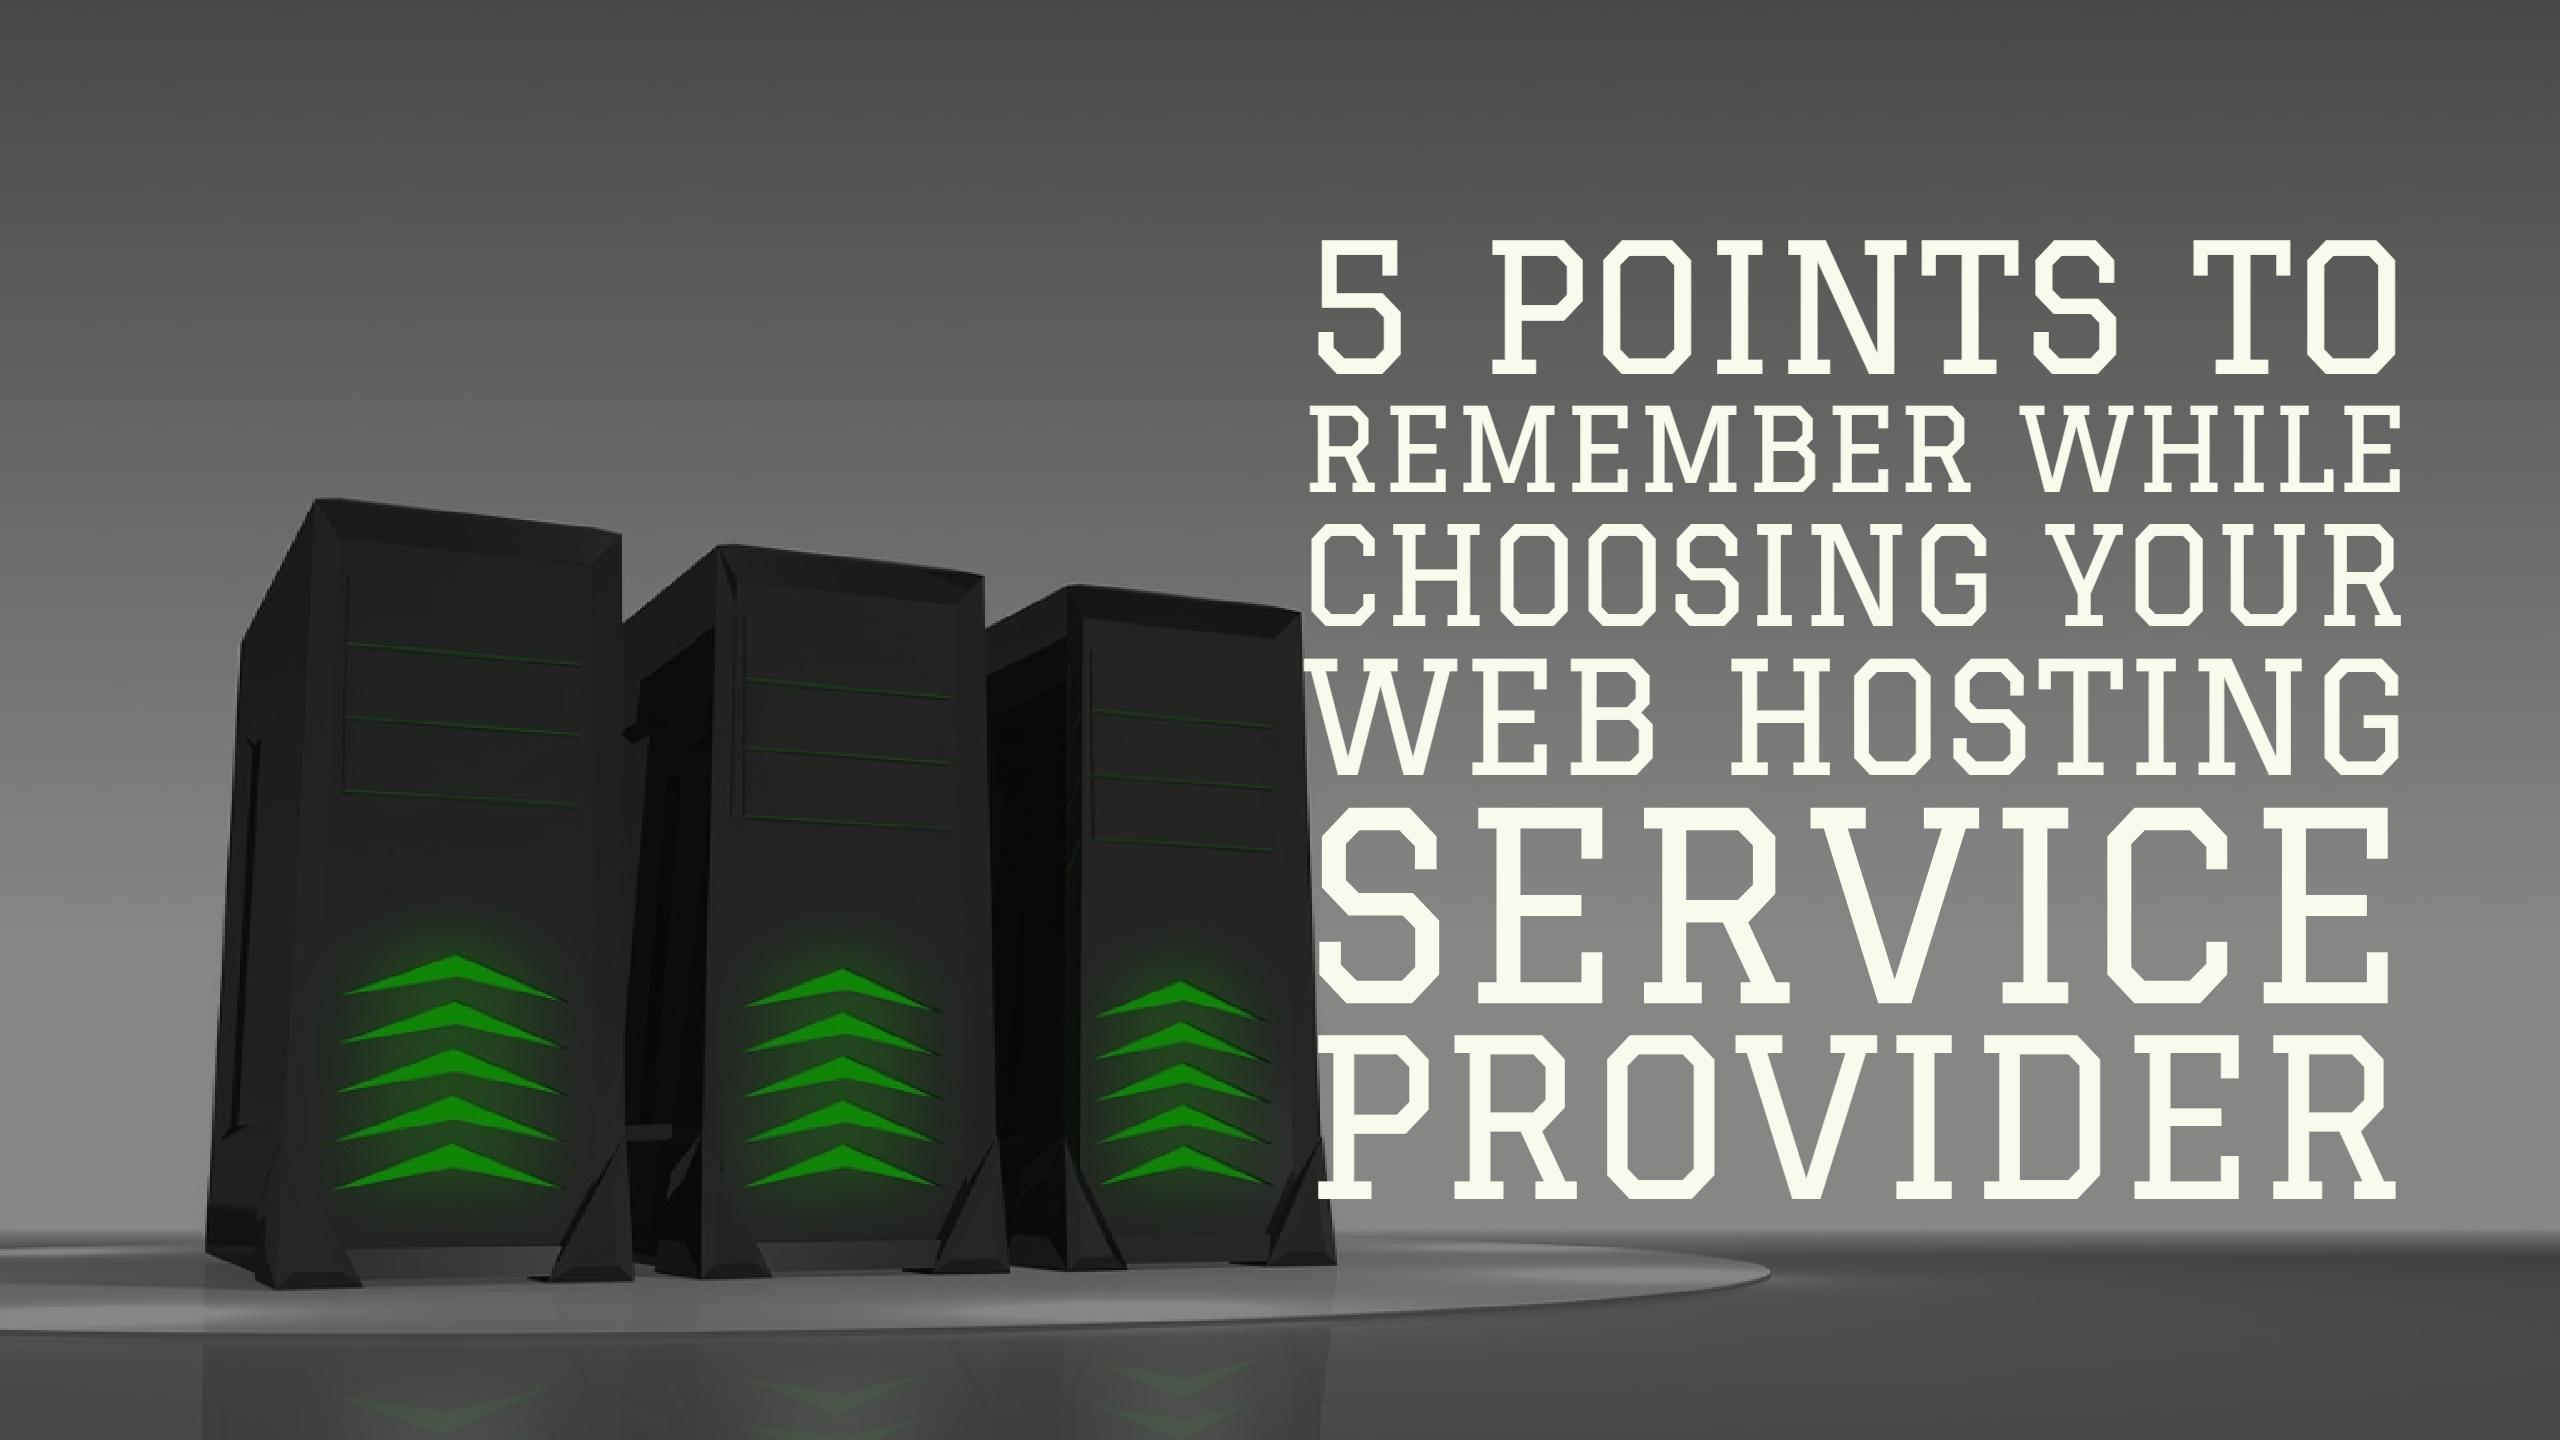 5 Points to remember while choosing your web hosting service provider  